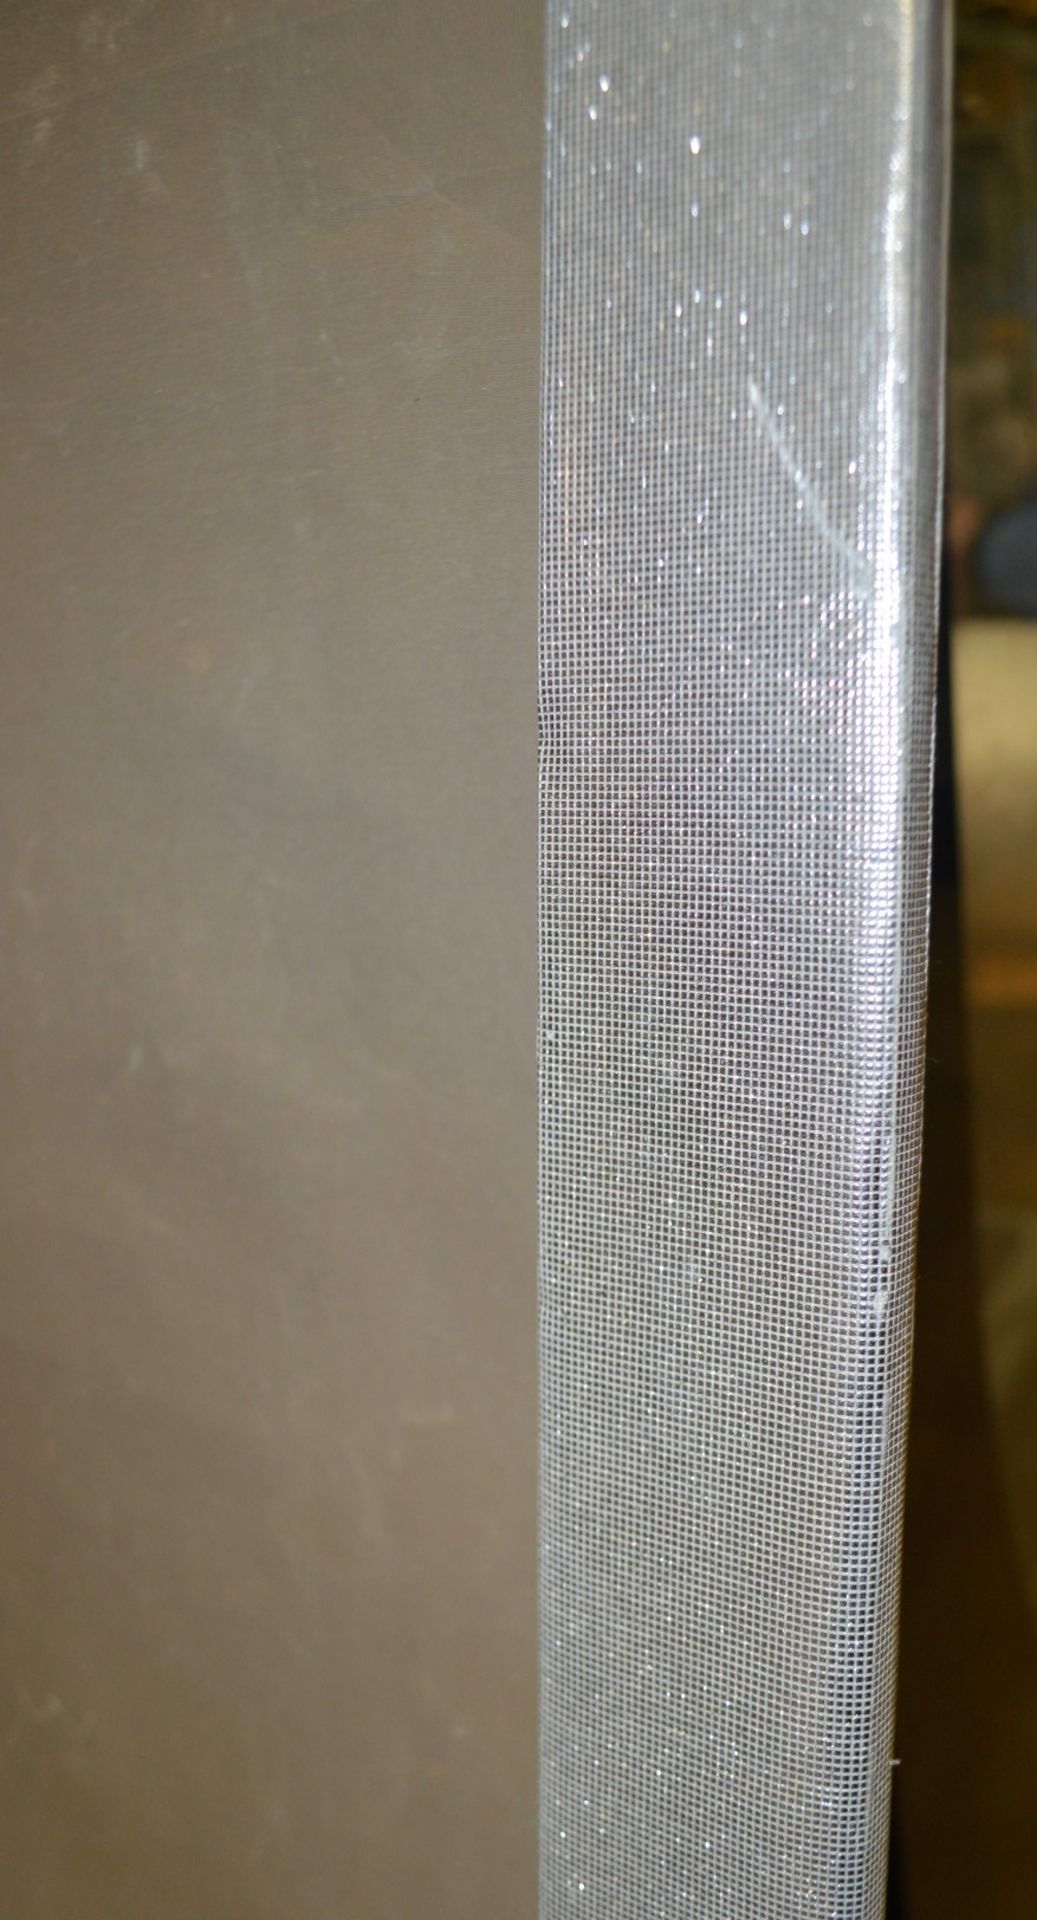 1 x Oblong-Shaped Silver Inset Upholstered Frame Lined With A Shimmering Silk Style Fabric - Image 2 of 6